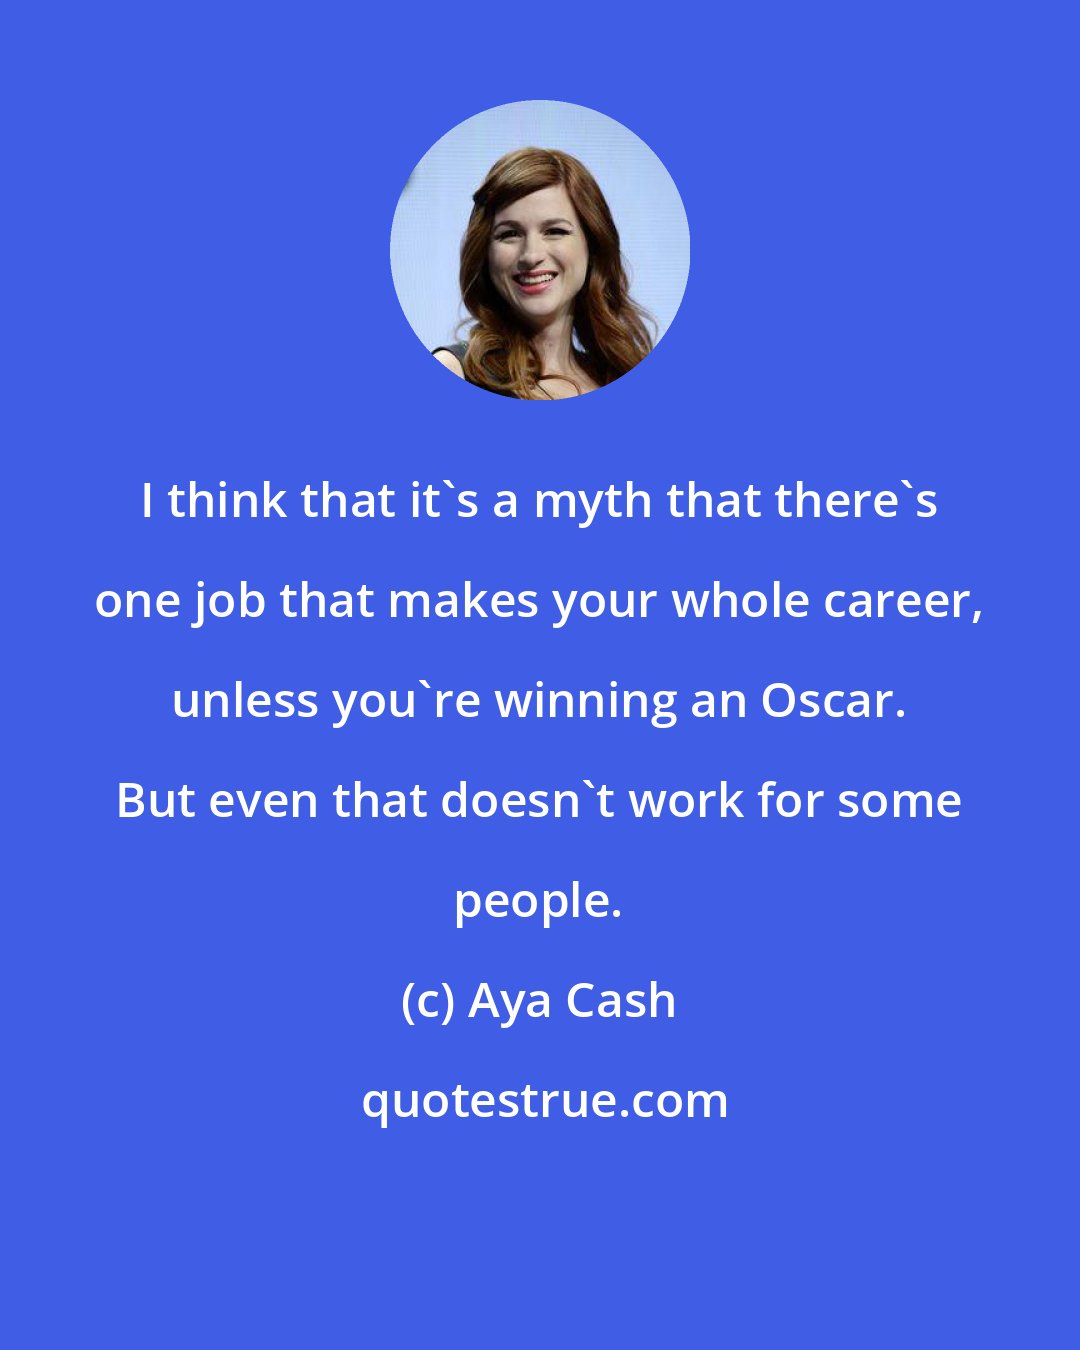 Aya Cash: I think that it's a myth that there's one job that makes your whole career, unless you're winning an Oscar. But even that doesn't work for some people.